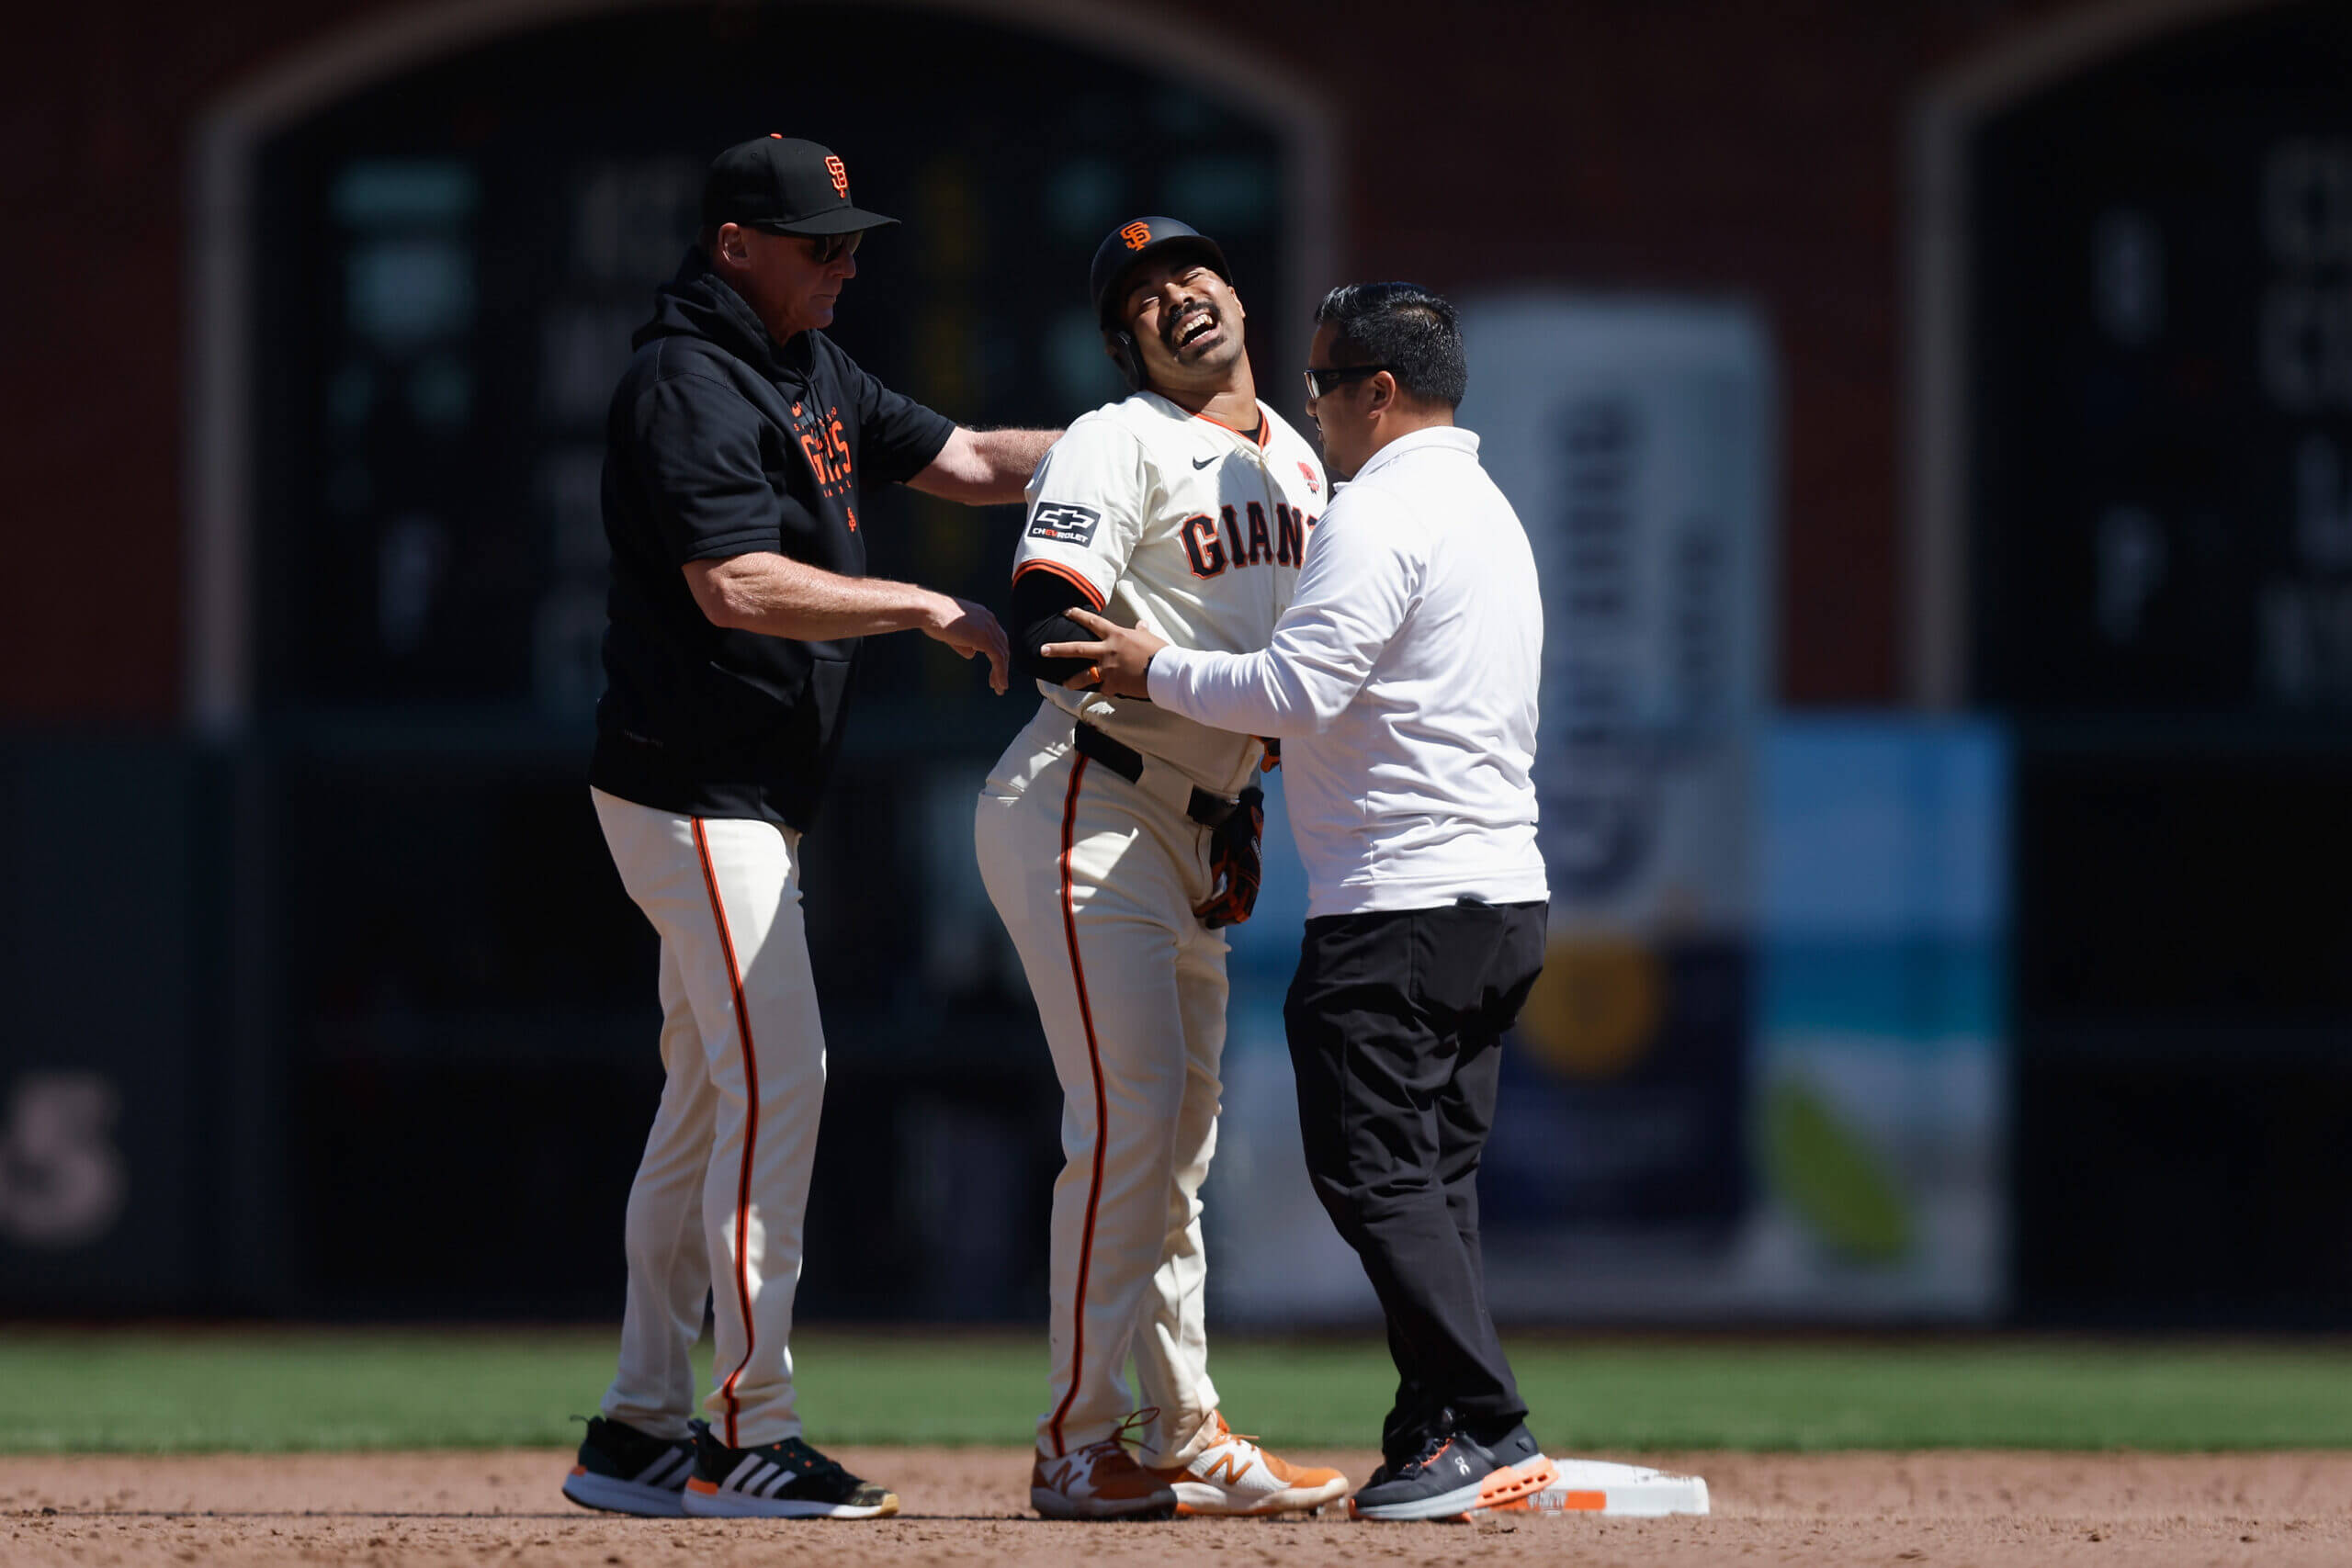 Giants overcome LaMonte Wade Jr.'s injury, another short Blake Snell start to beat Phillies